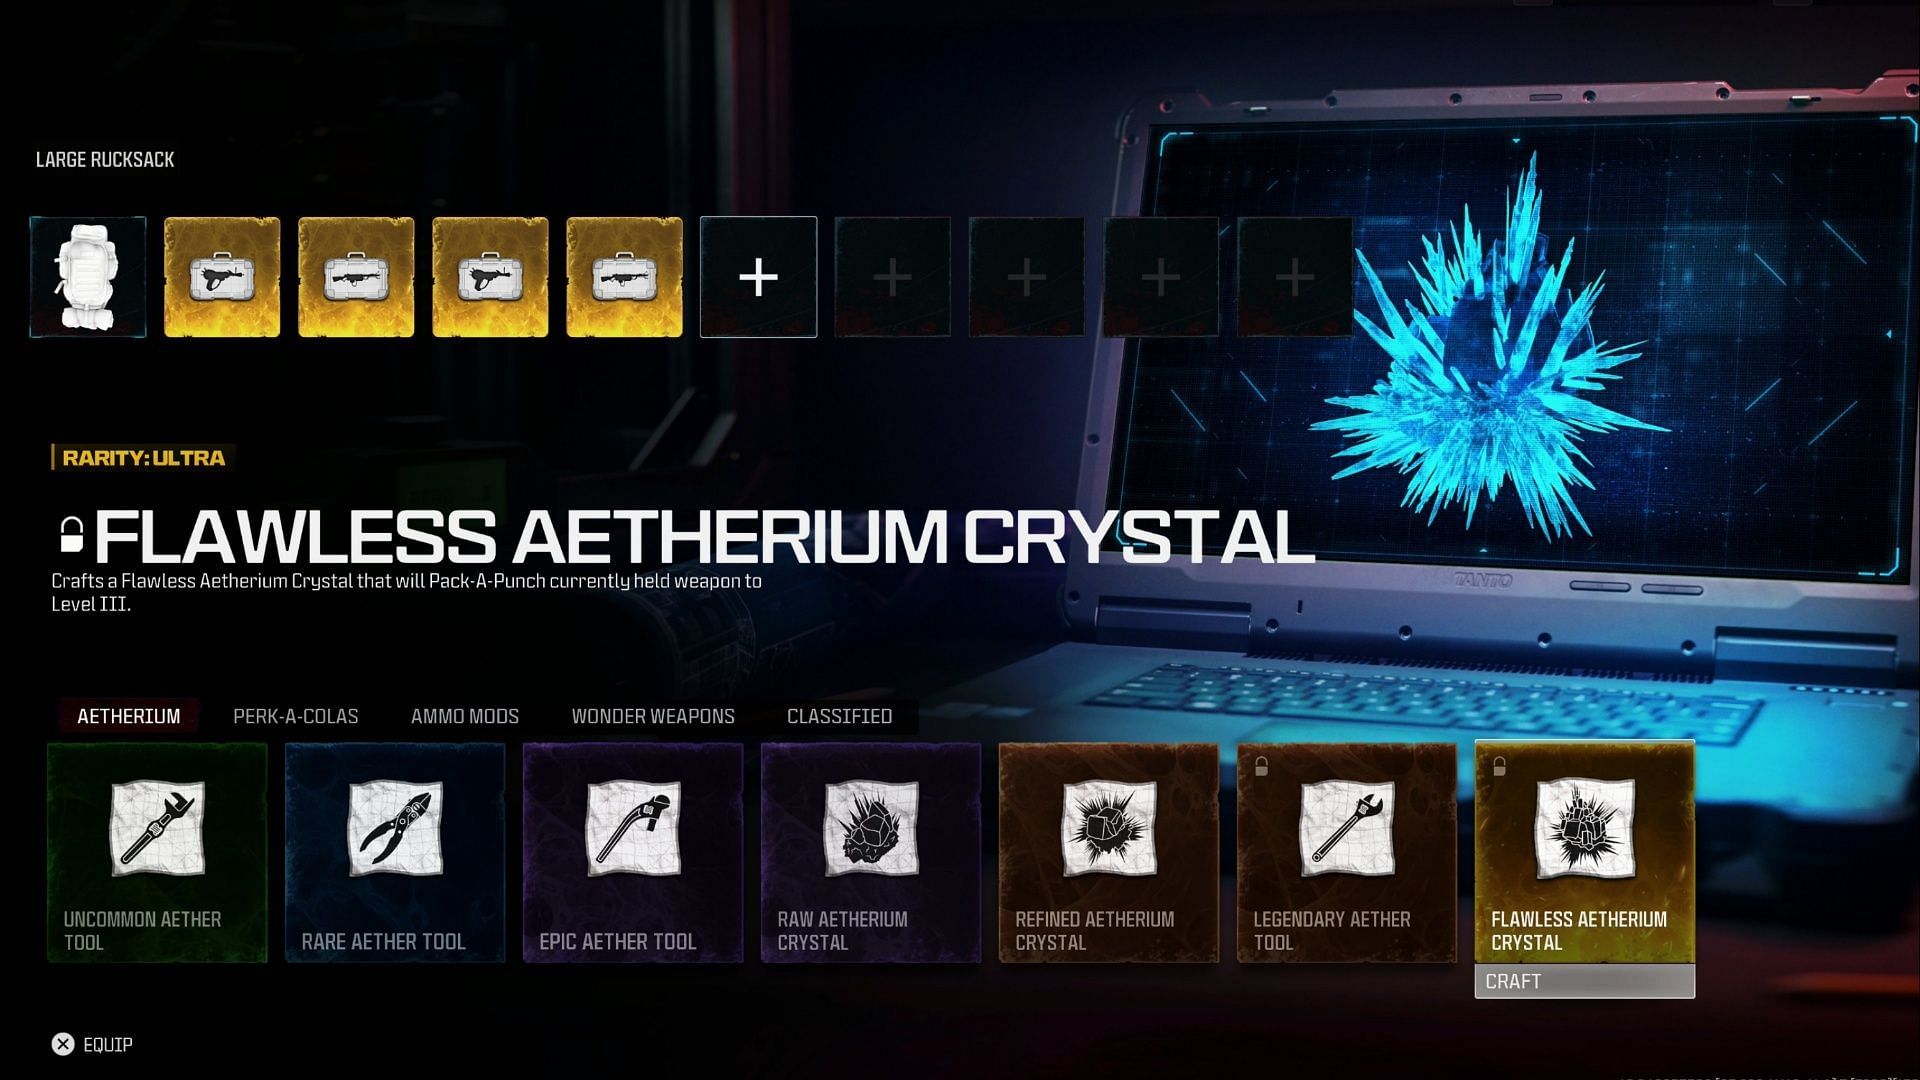 Flawless Aetherium Crystal Schematic in MW3 Zombies (Image via Activision)